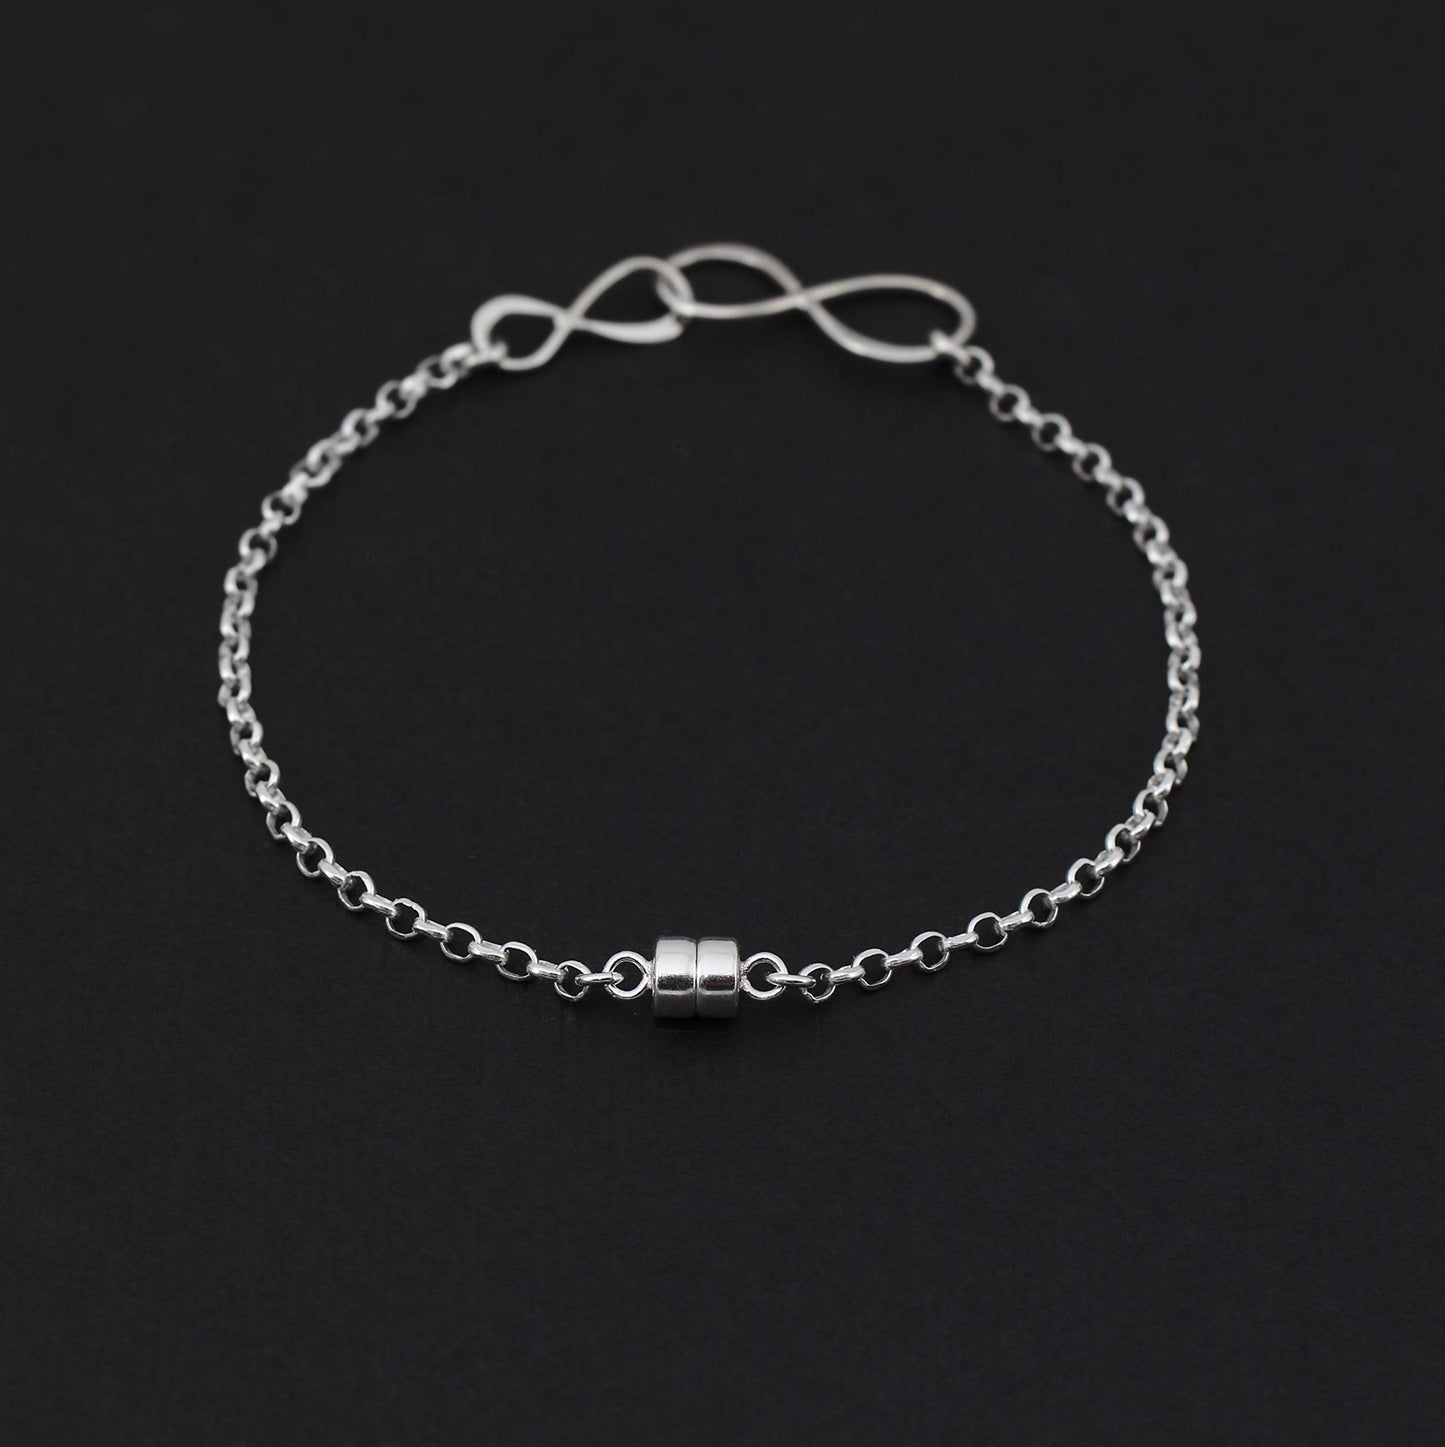 Grandmother Granddaughter Bracelet • Silver MAGNETIC CLASP • Two Connected Infinity Charm Bracelet • 2 Infinity Links • Gifts for Grandma and Grandchild • Adult Granddaughter Gift